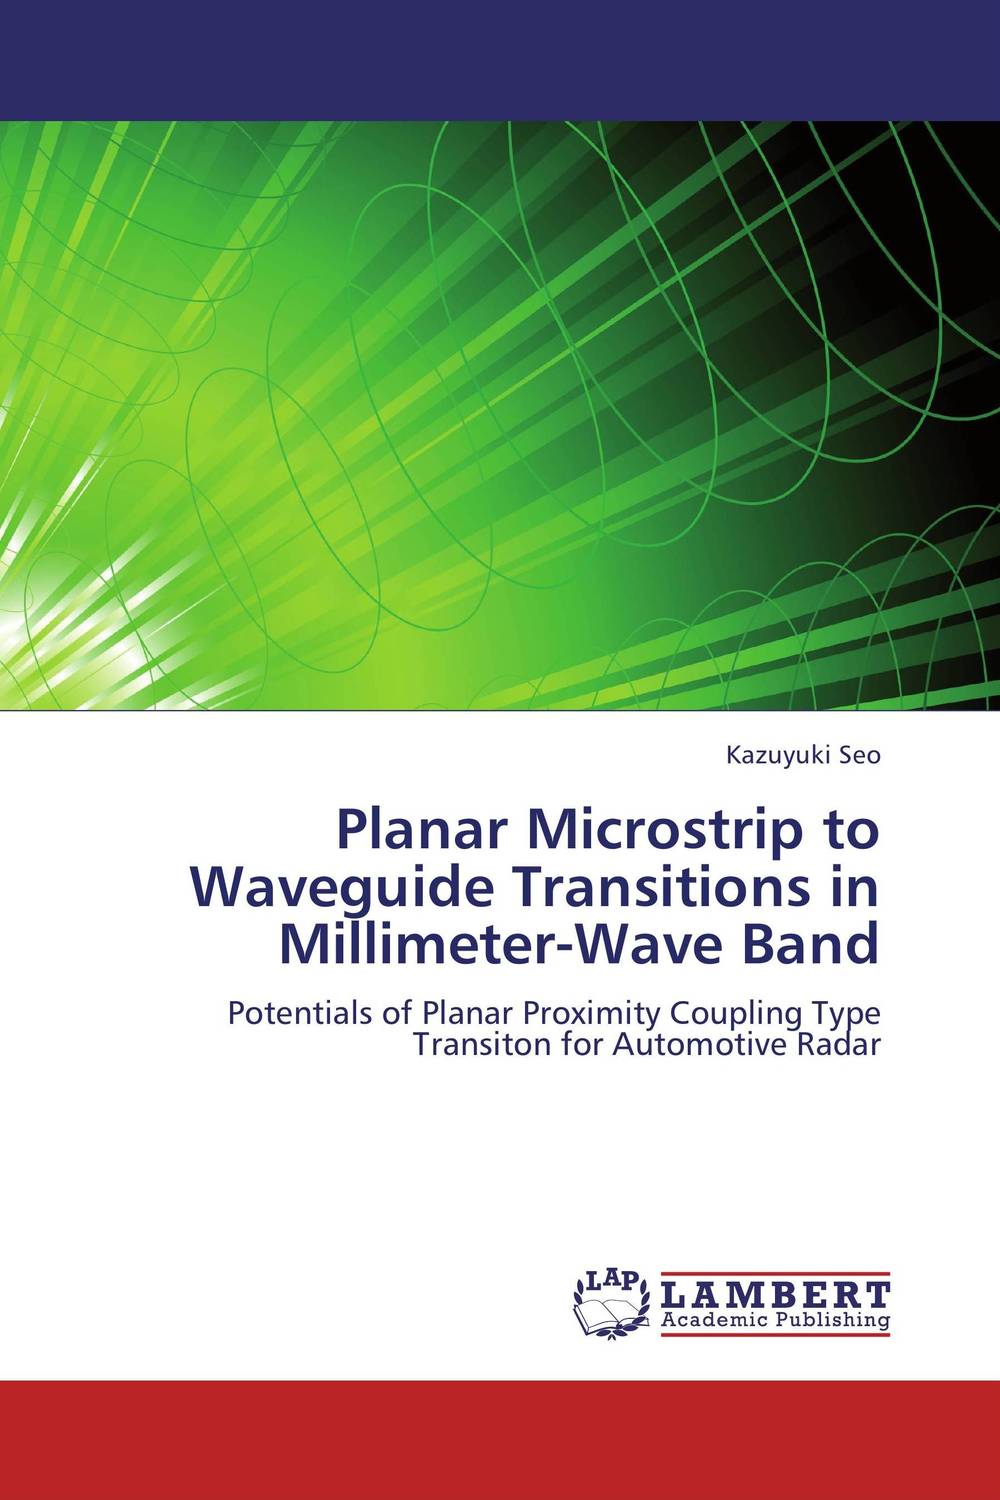 Planar Microstrip to Waveguide Transitions in Millimeter-Wave Band